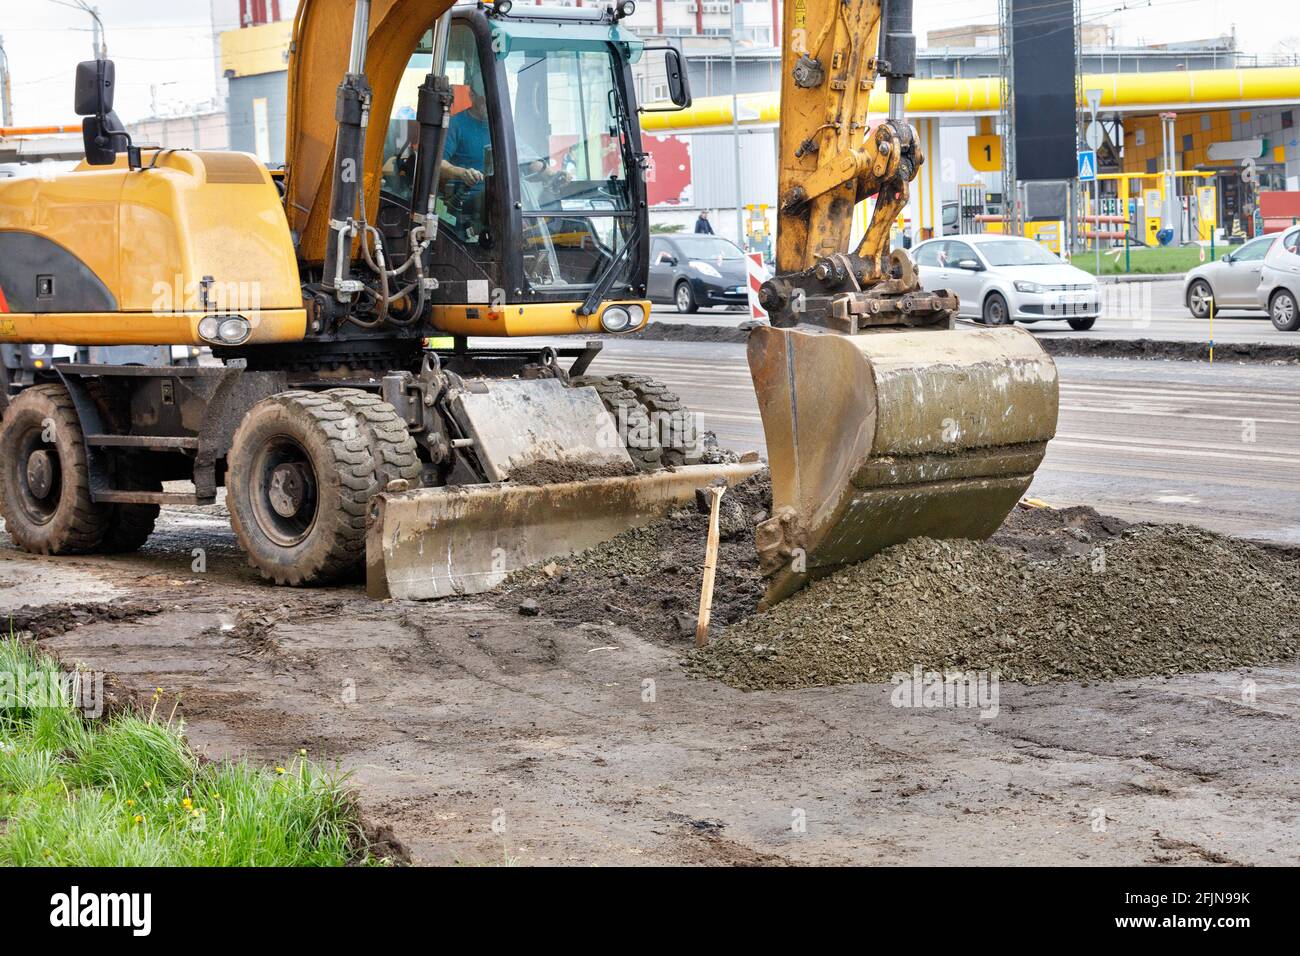 A heavy road excavator flattens a pile of rubble with a bucket when repairing a section of a road. Stock Photo